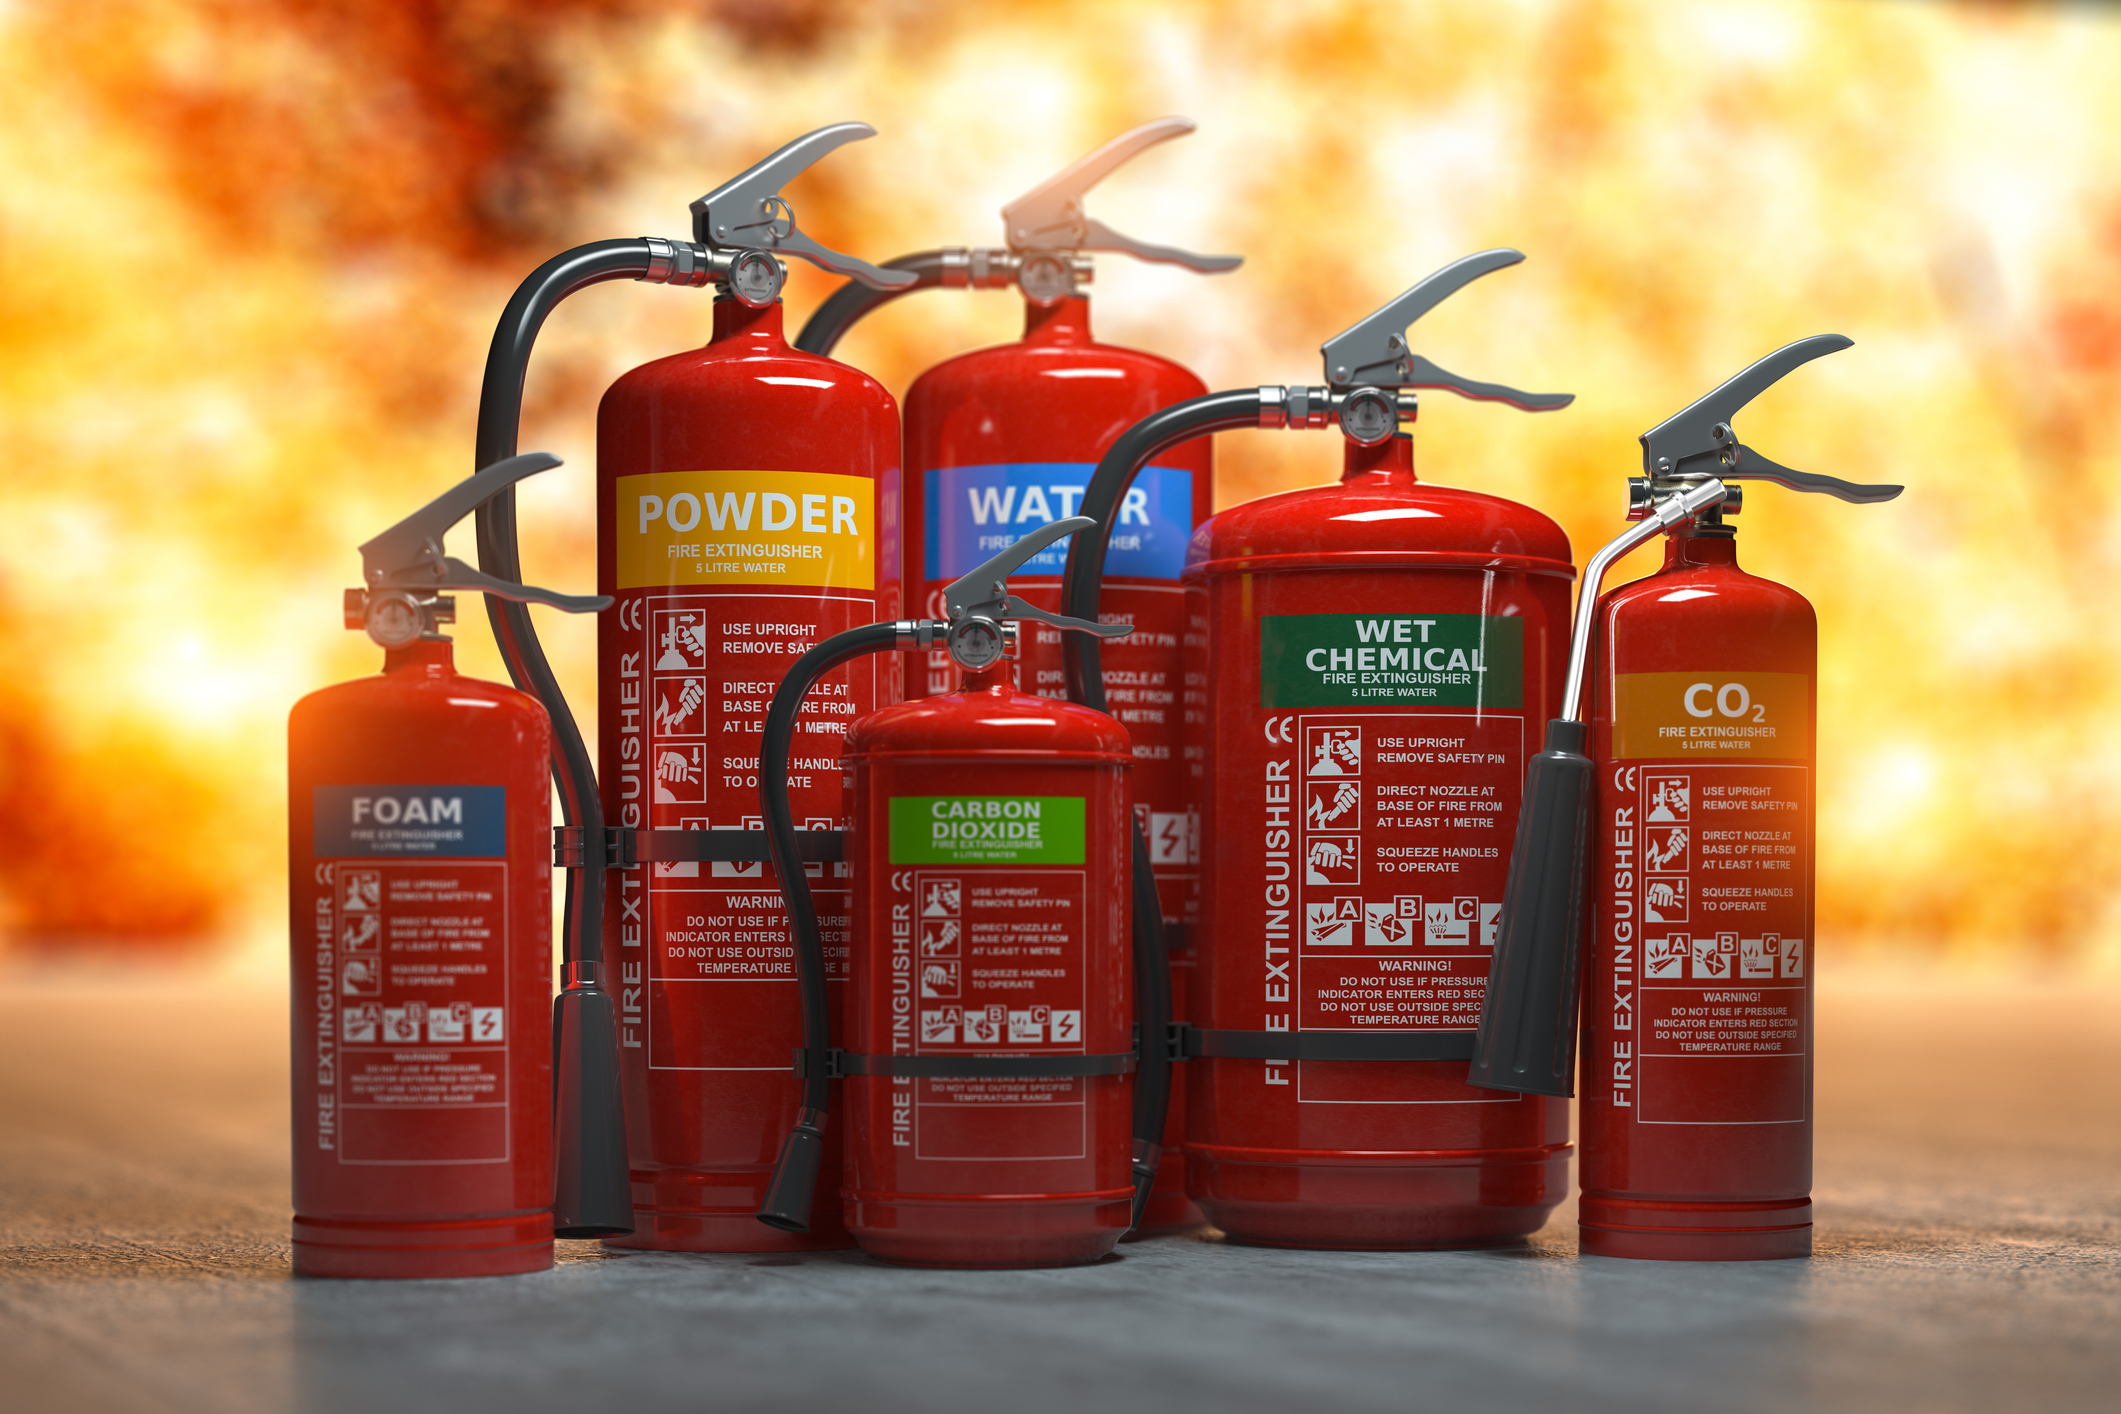 Which Fire Extinguisher is Used for Electrical Fires?